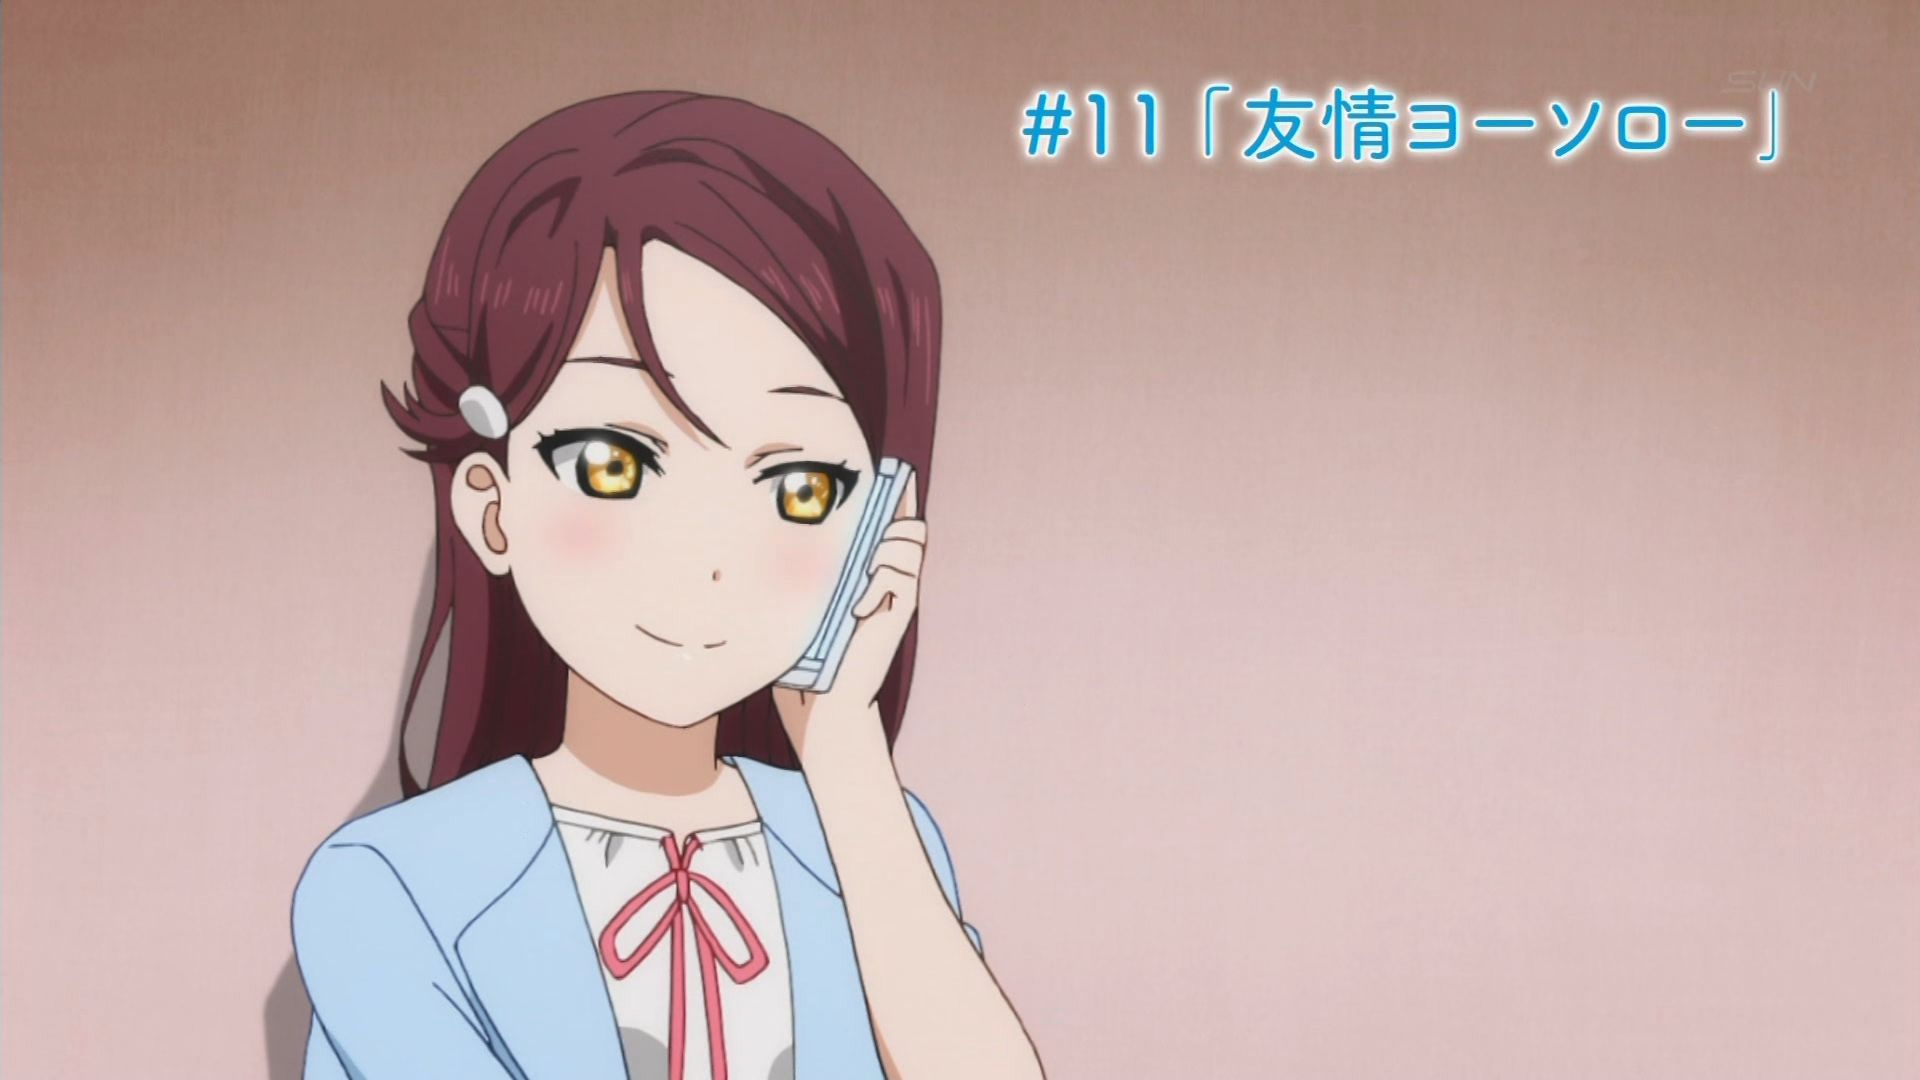 [Artificial mouth times] "love live! Sunshine's 10 stories, swim times once I I eh eh! Rubidia best trap! 41